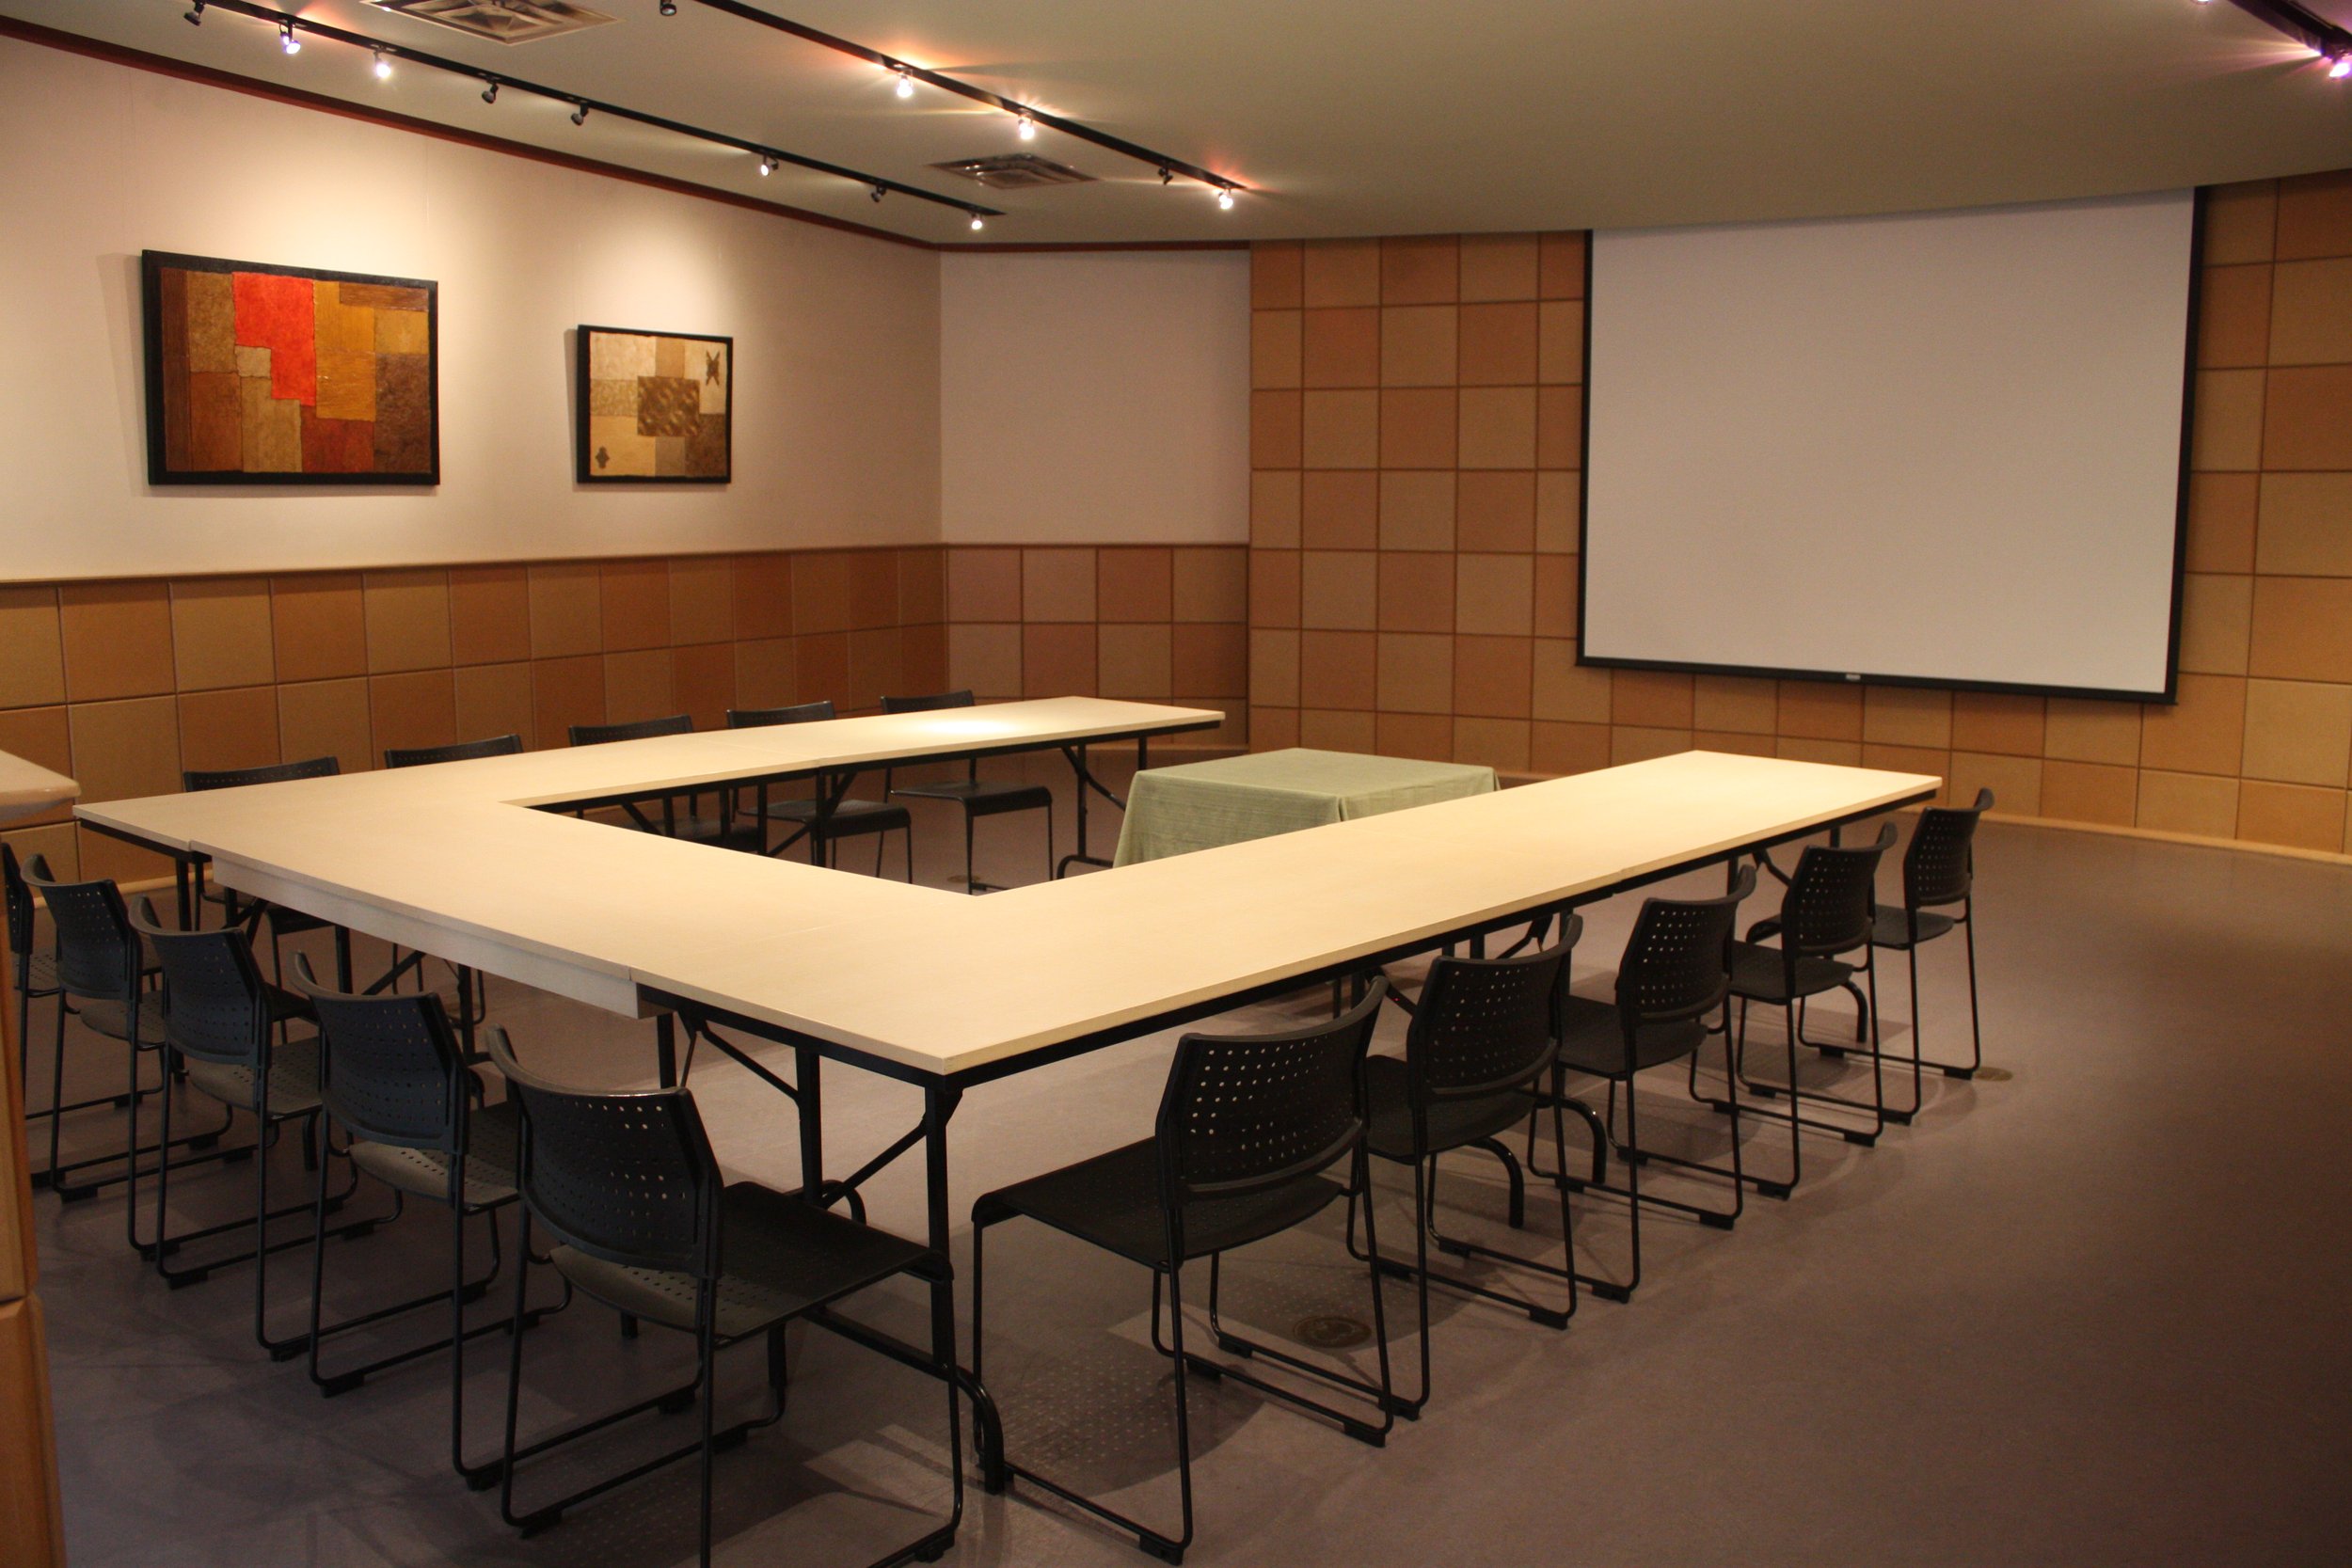  The visitors’ centre set up for a meeting with three long tables forming a ‘U’ shape in front of a projector screen 